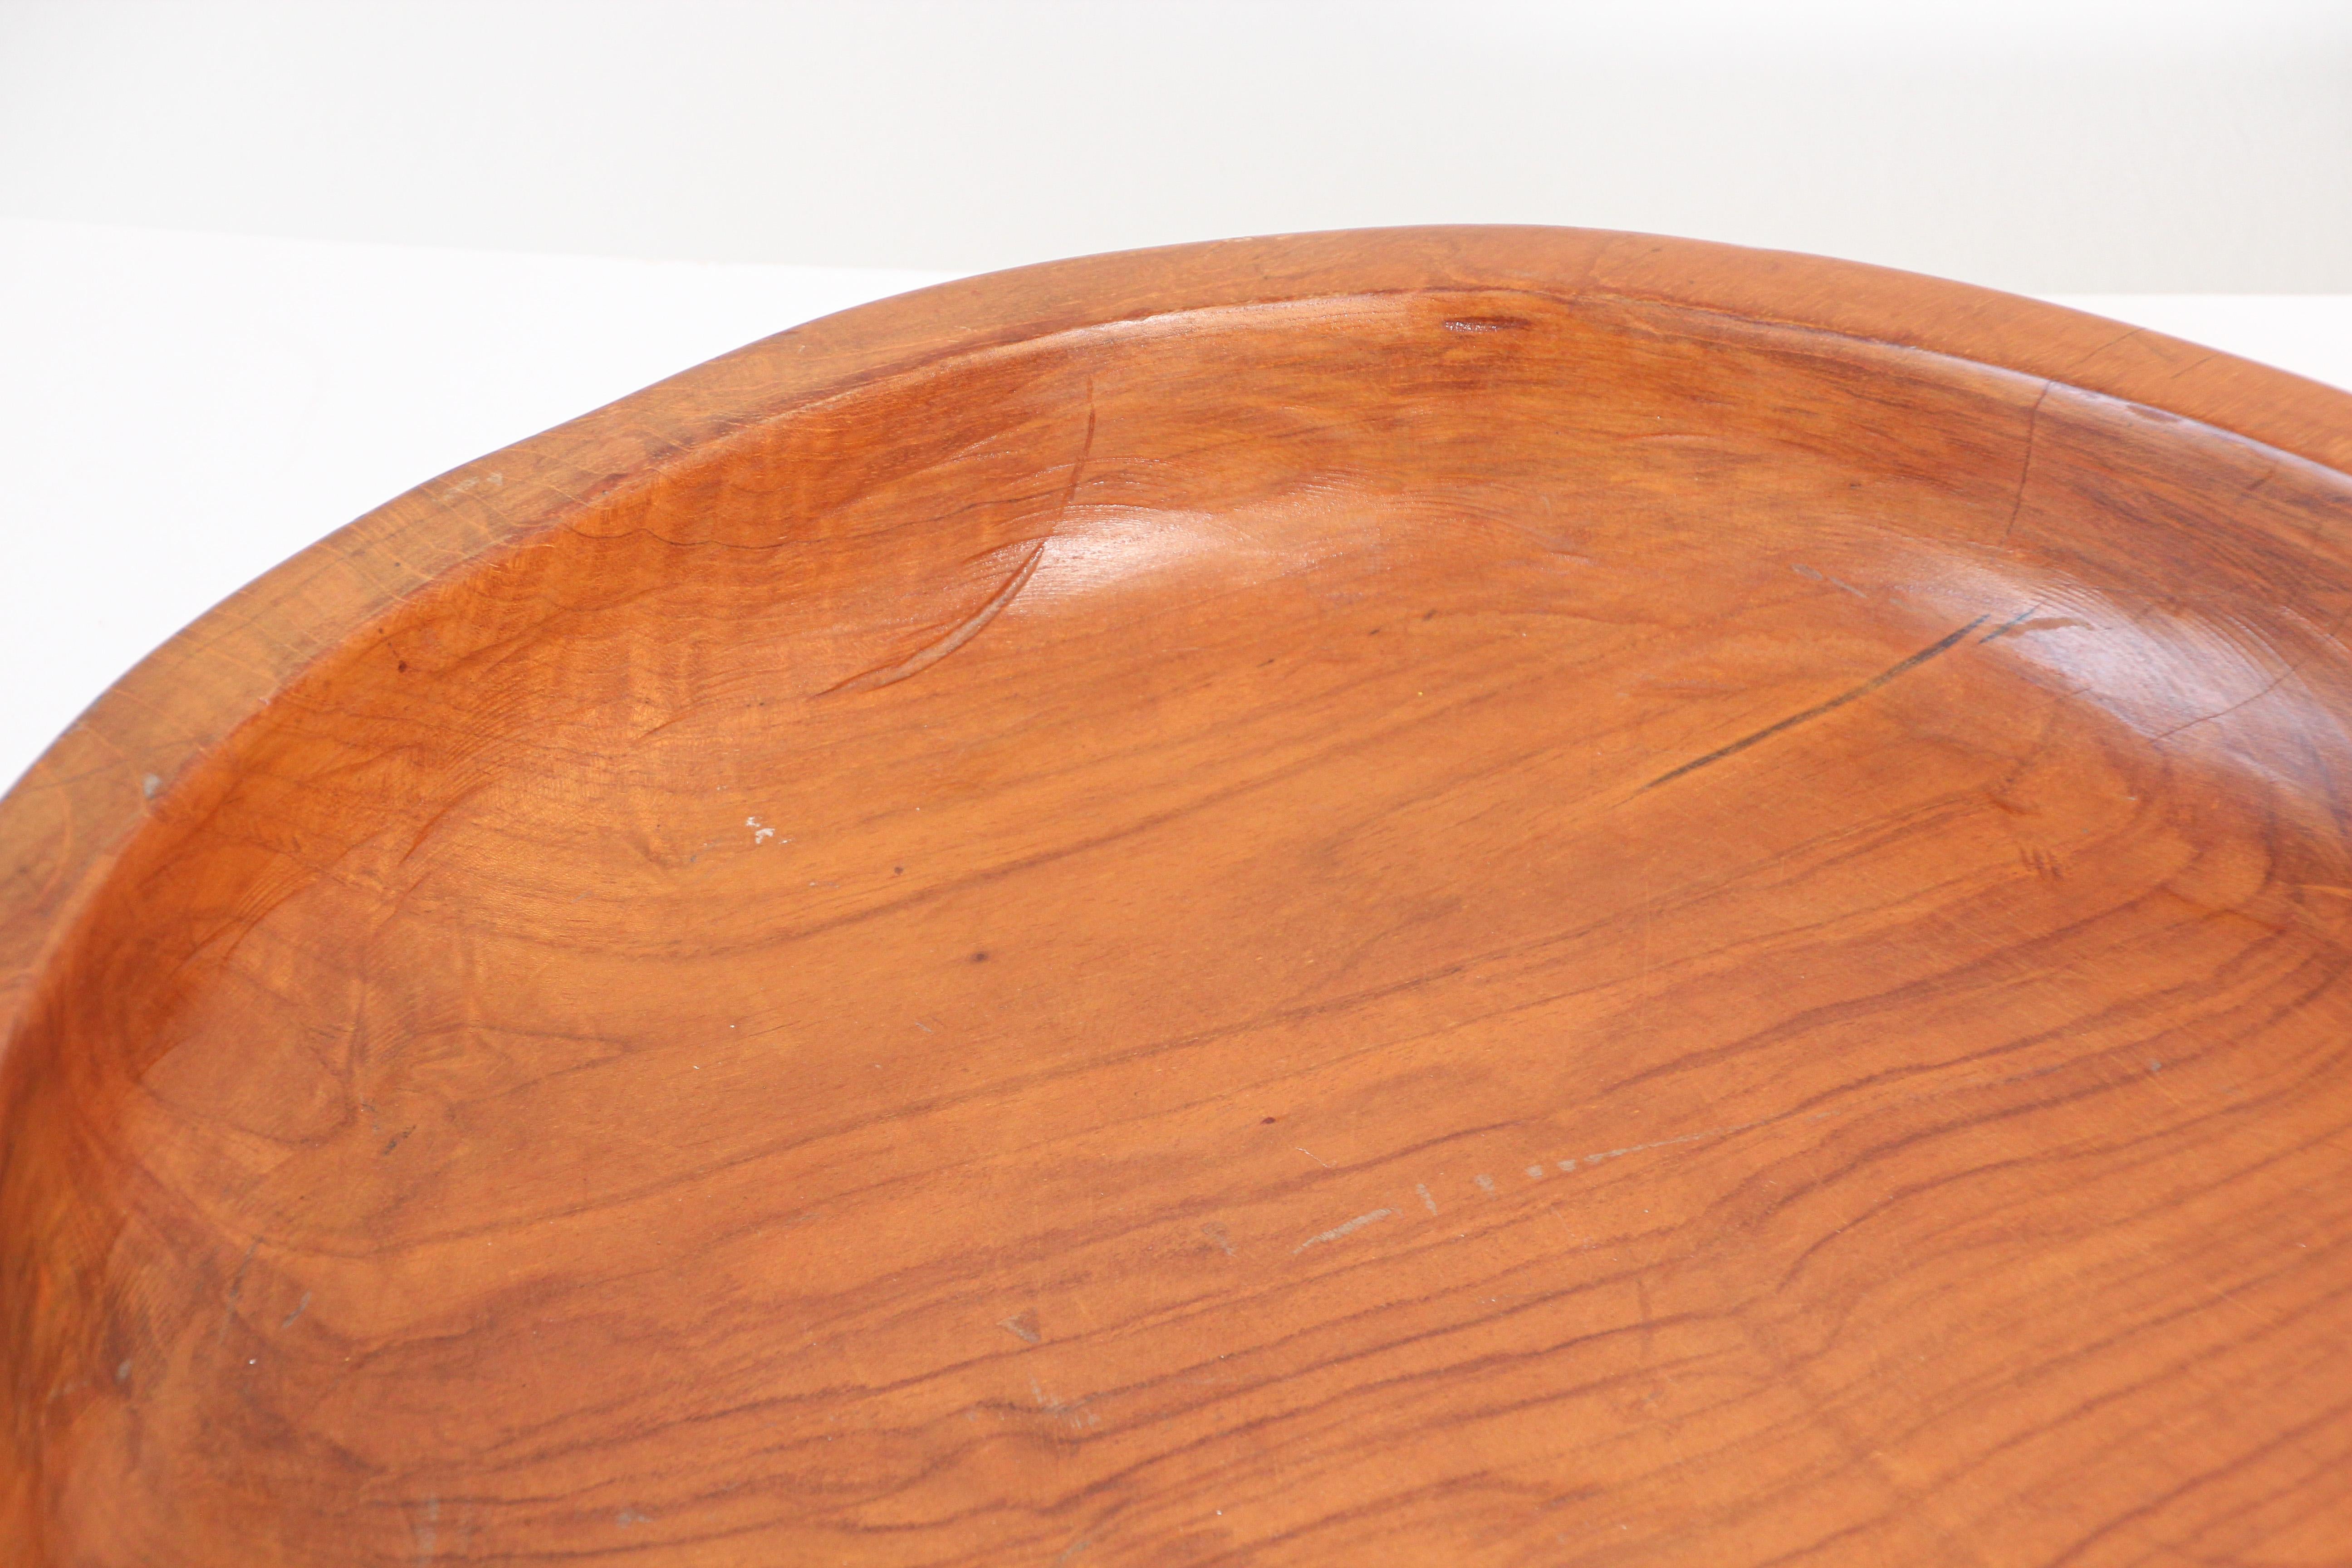 Large Vintage Hand Hewn Organic Teak Burl Bowl In Good Condition For Sale In North Hollywood, CA